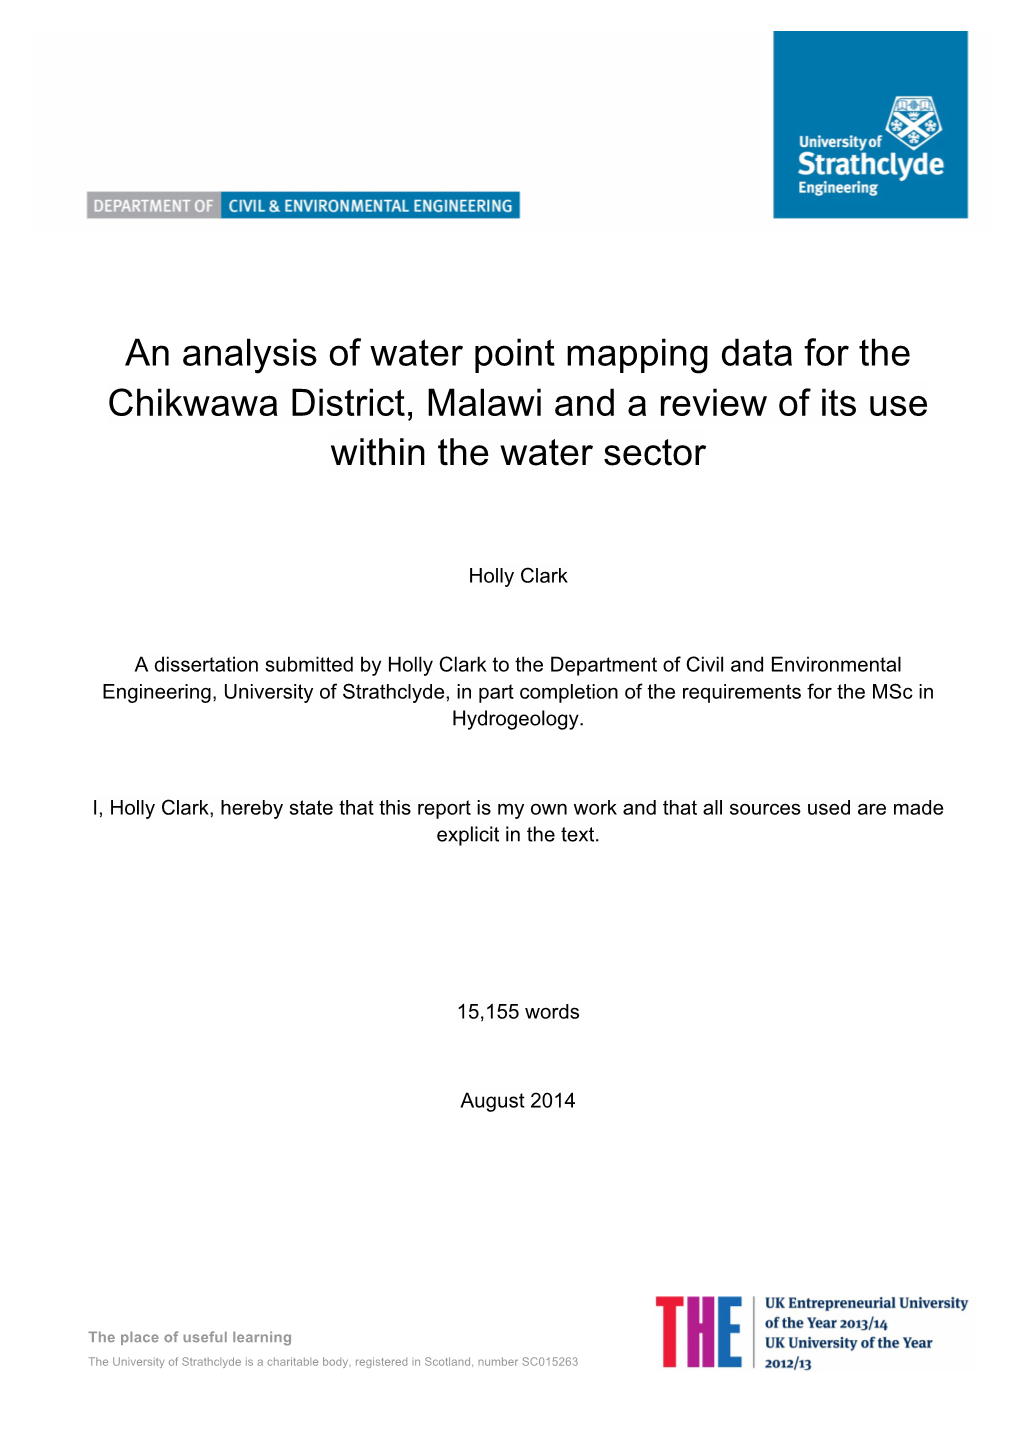 An Analysis of Water Point Mapping Data for the Chikwawa District, Malawi and a Review of Its Use Within the Water Sector